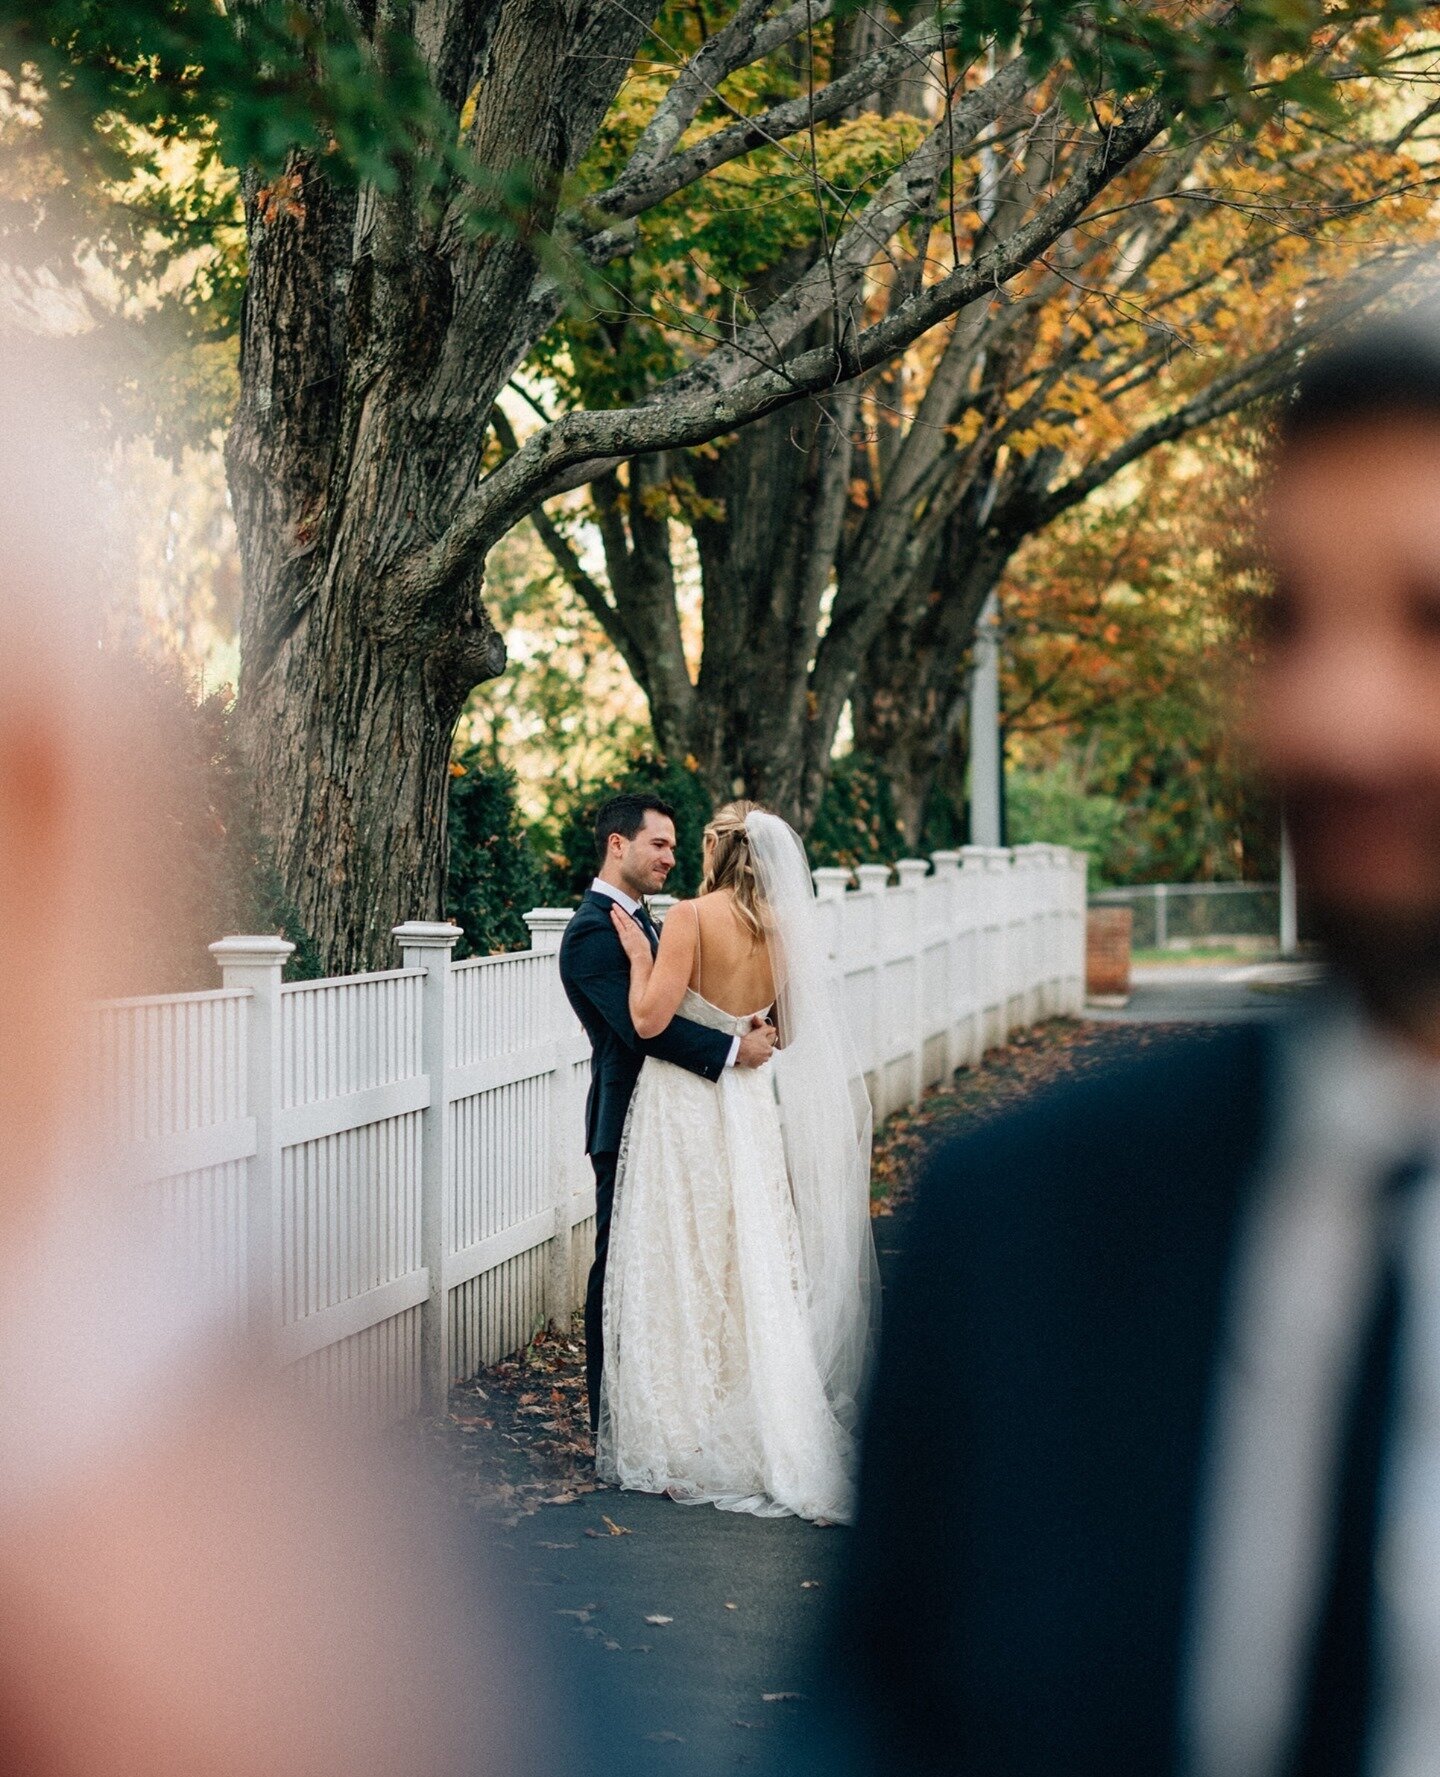 Hold your loved ones close, foster your connection with those important to you, treat others with kindness, leave places better than you found them...It's simple, but so many miss the point.⁠
⁠
This is a photo from Ellen + Chris' Beautiful Fall Weddi